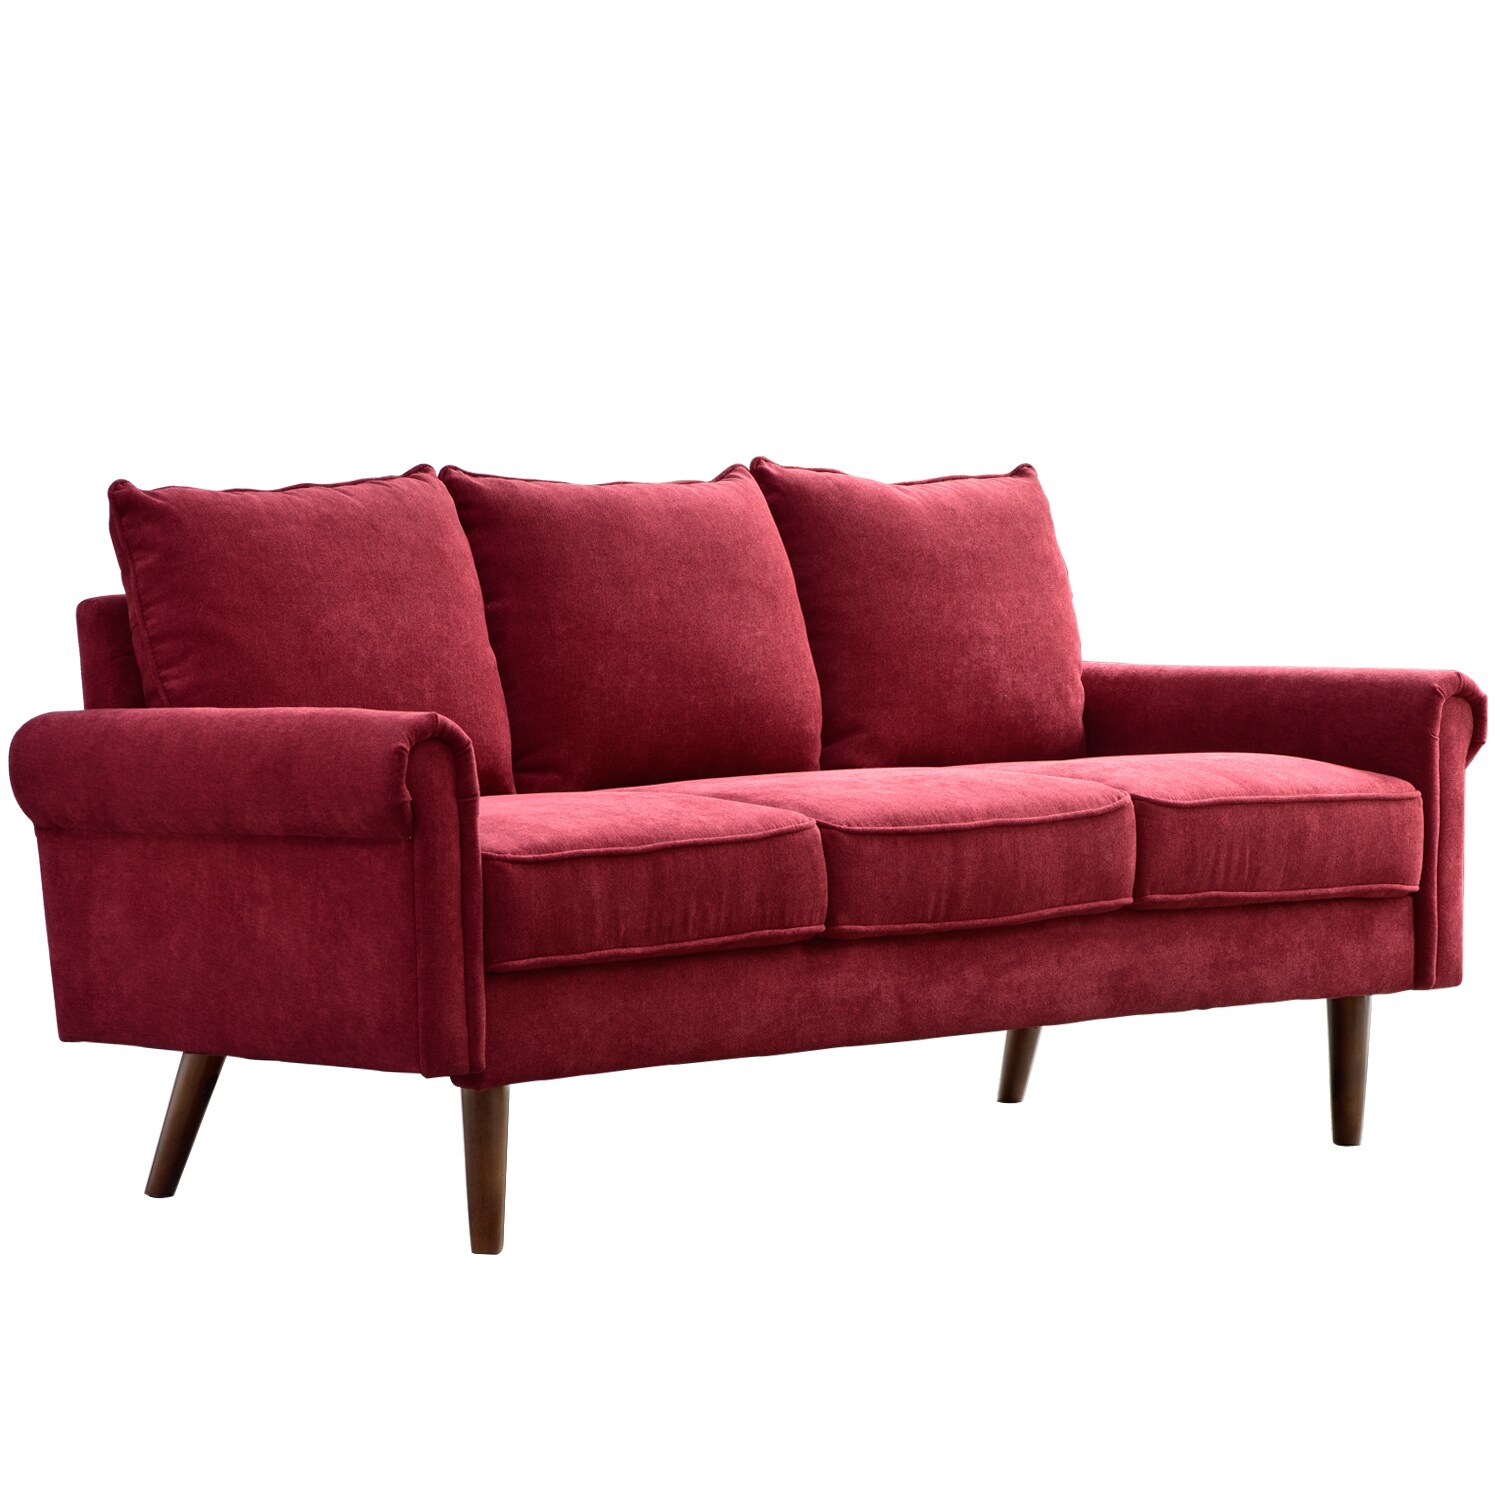 Red Velvet Sofa In The Couches